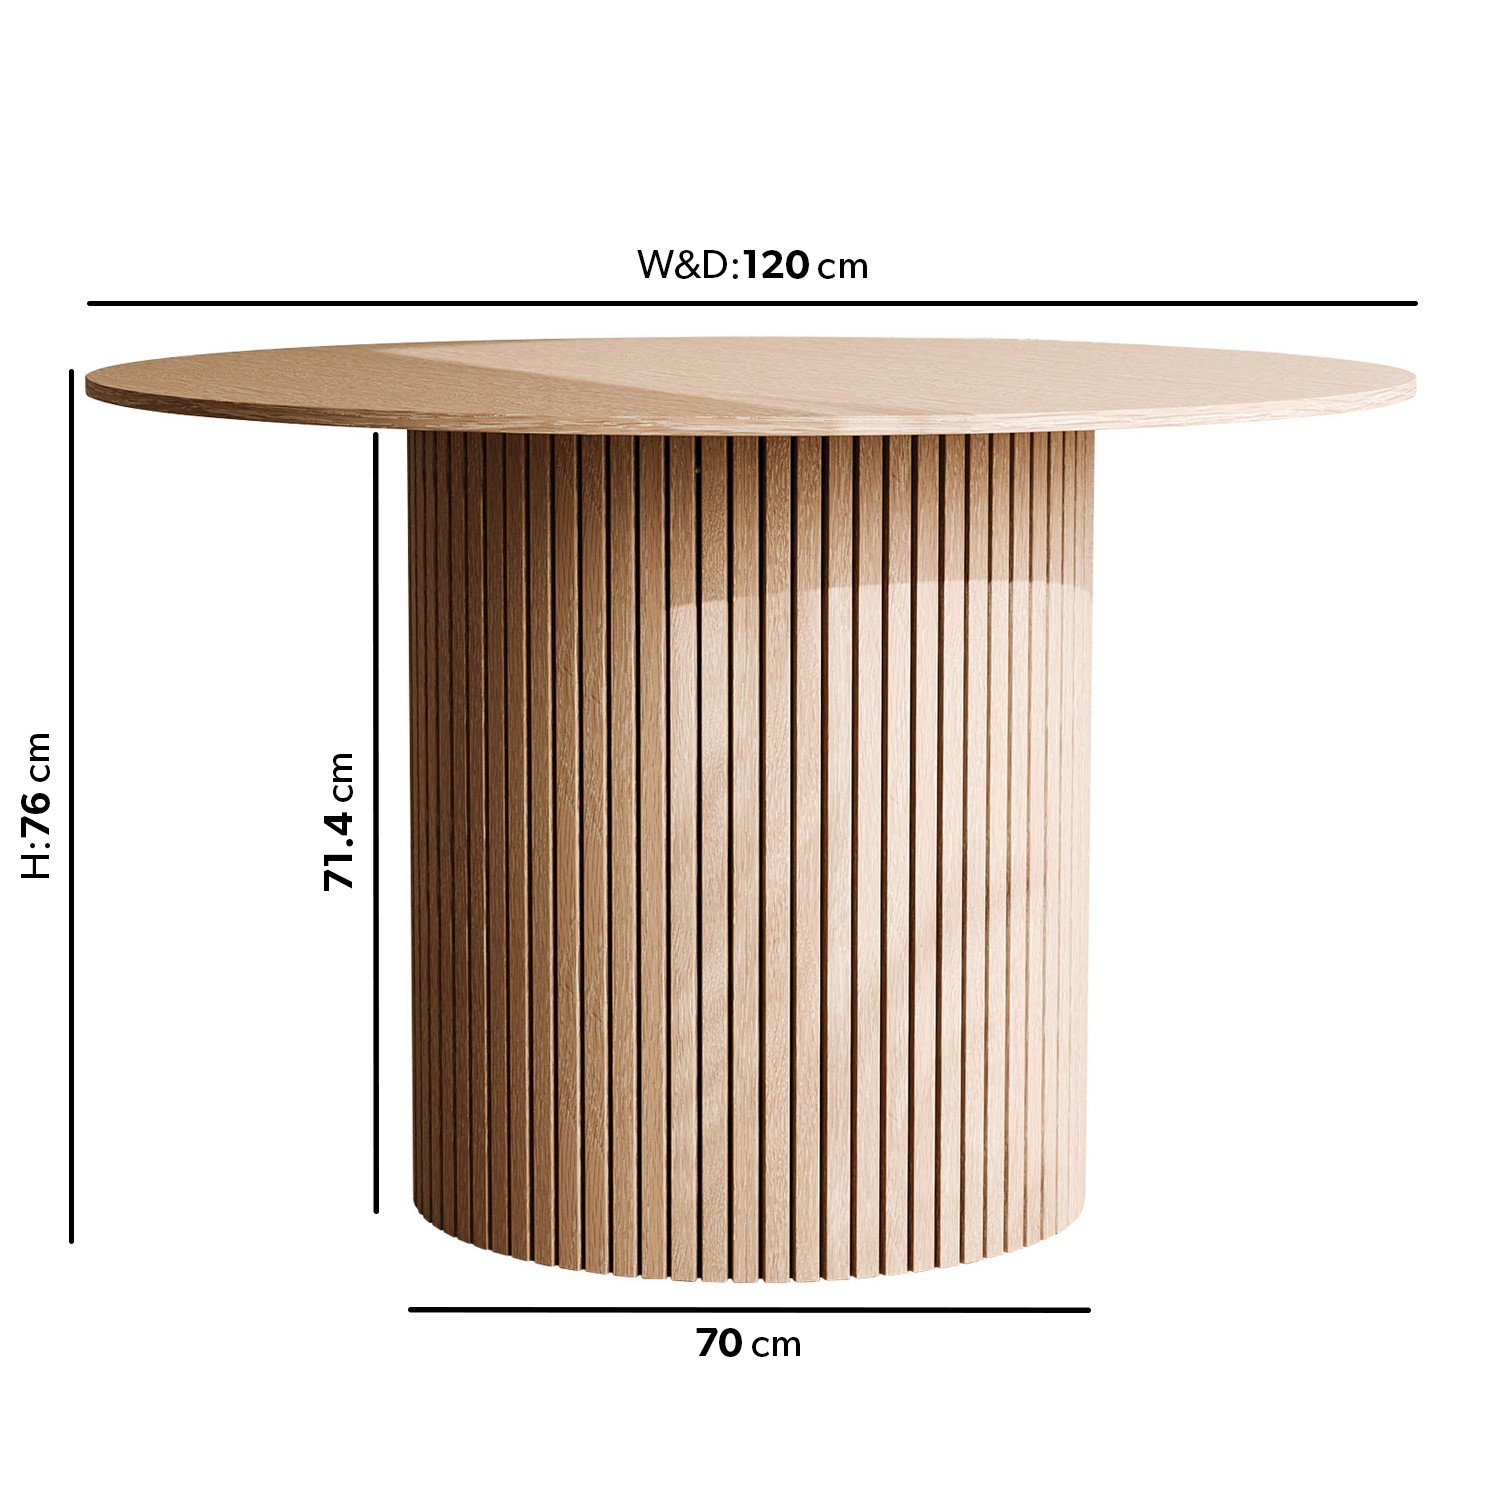 Read more about Round light oak dining table seats 4 jarel